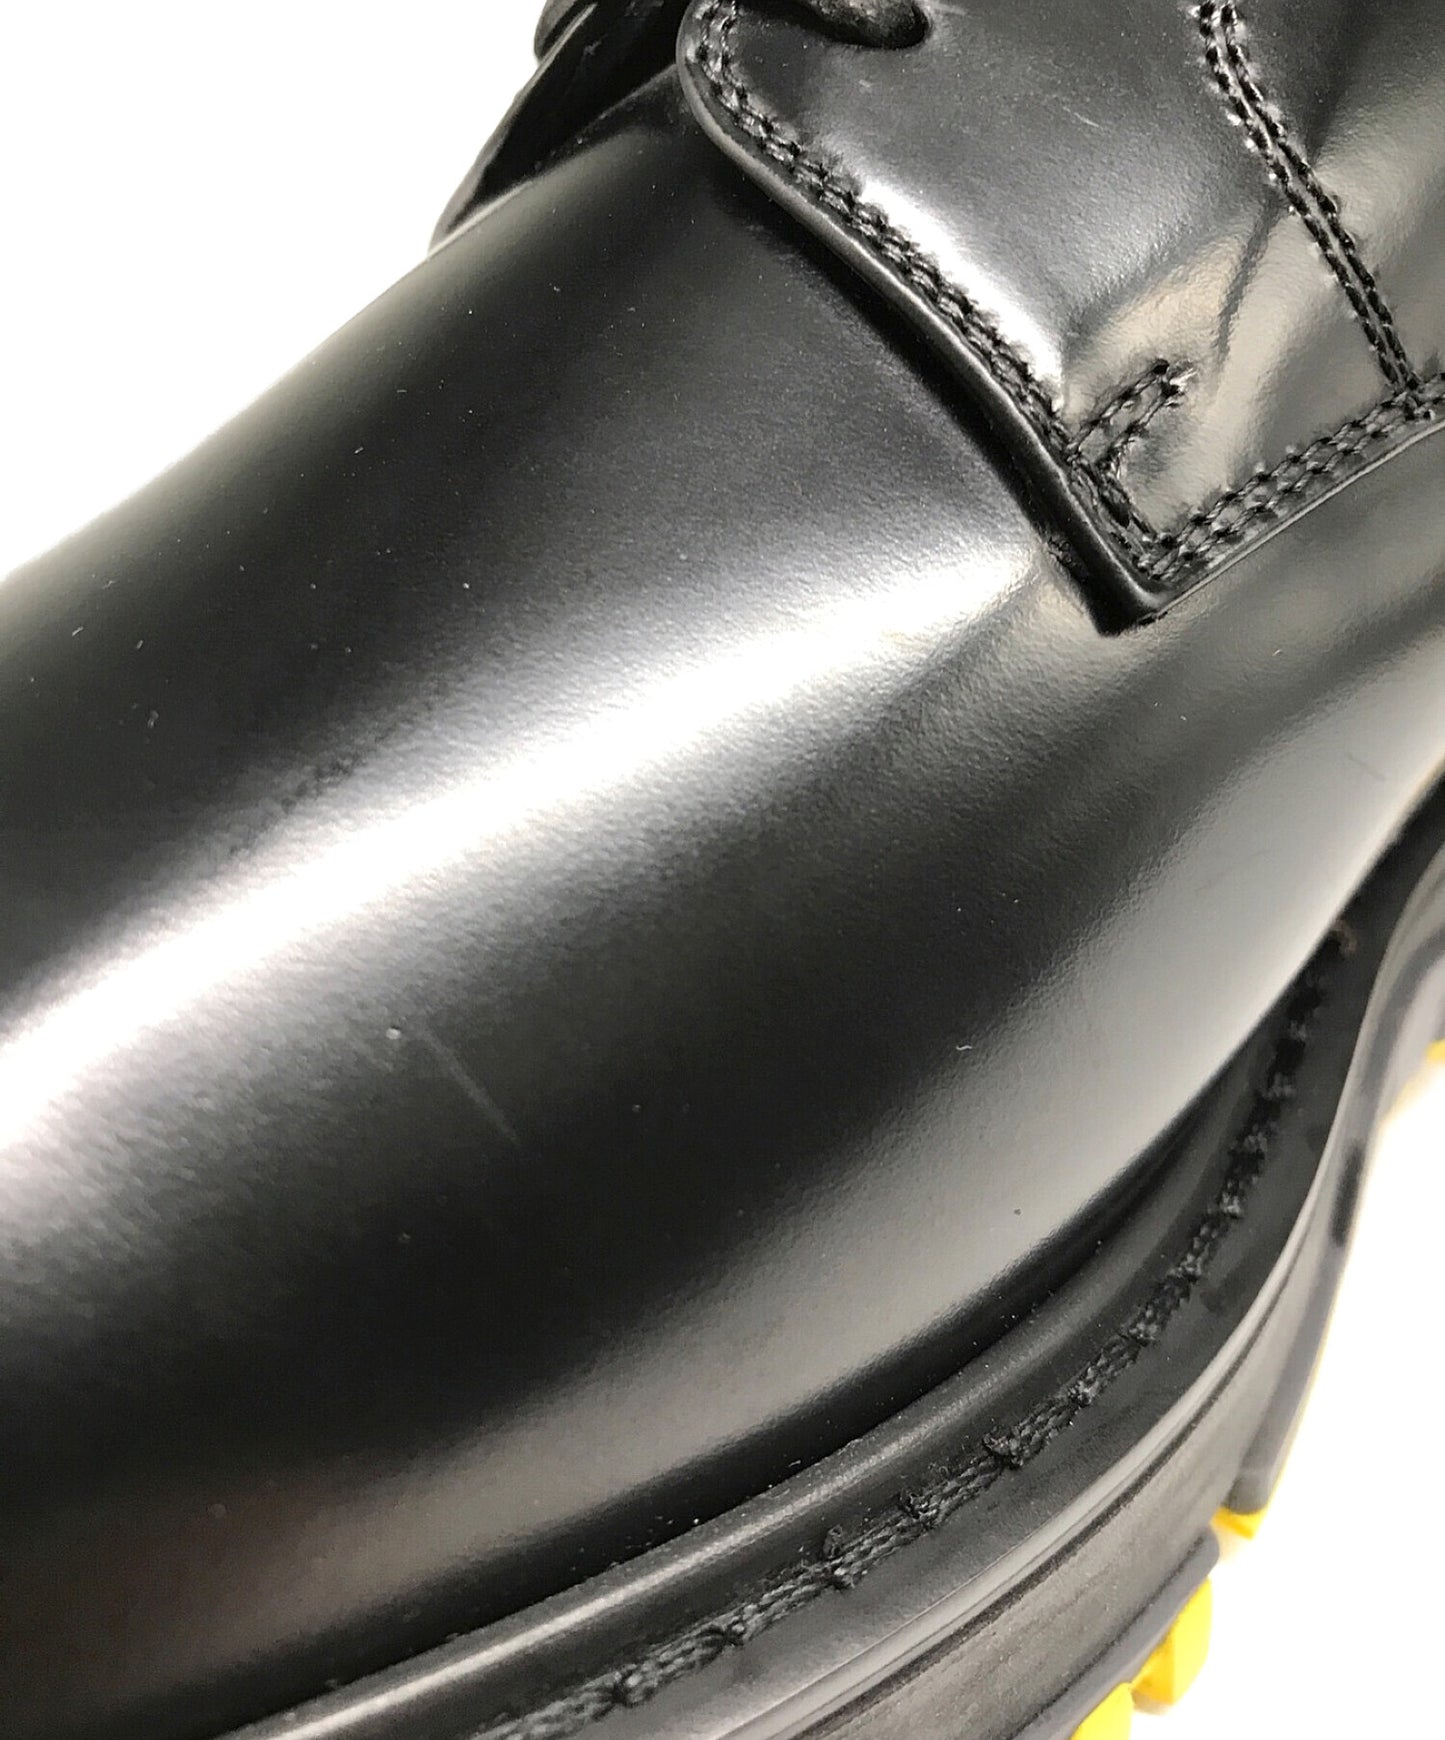 [Pre-owned] DIOR HOMME plain toe leather shoes 15H FR